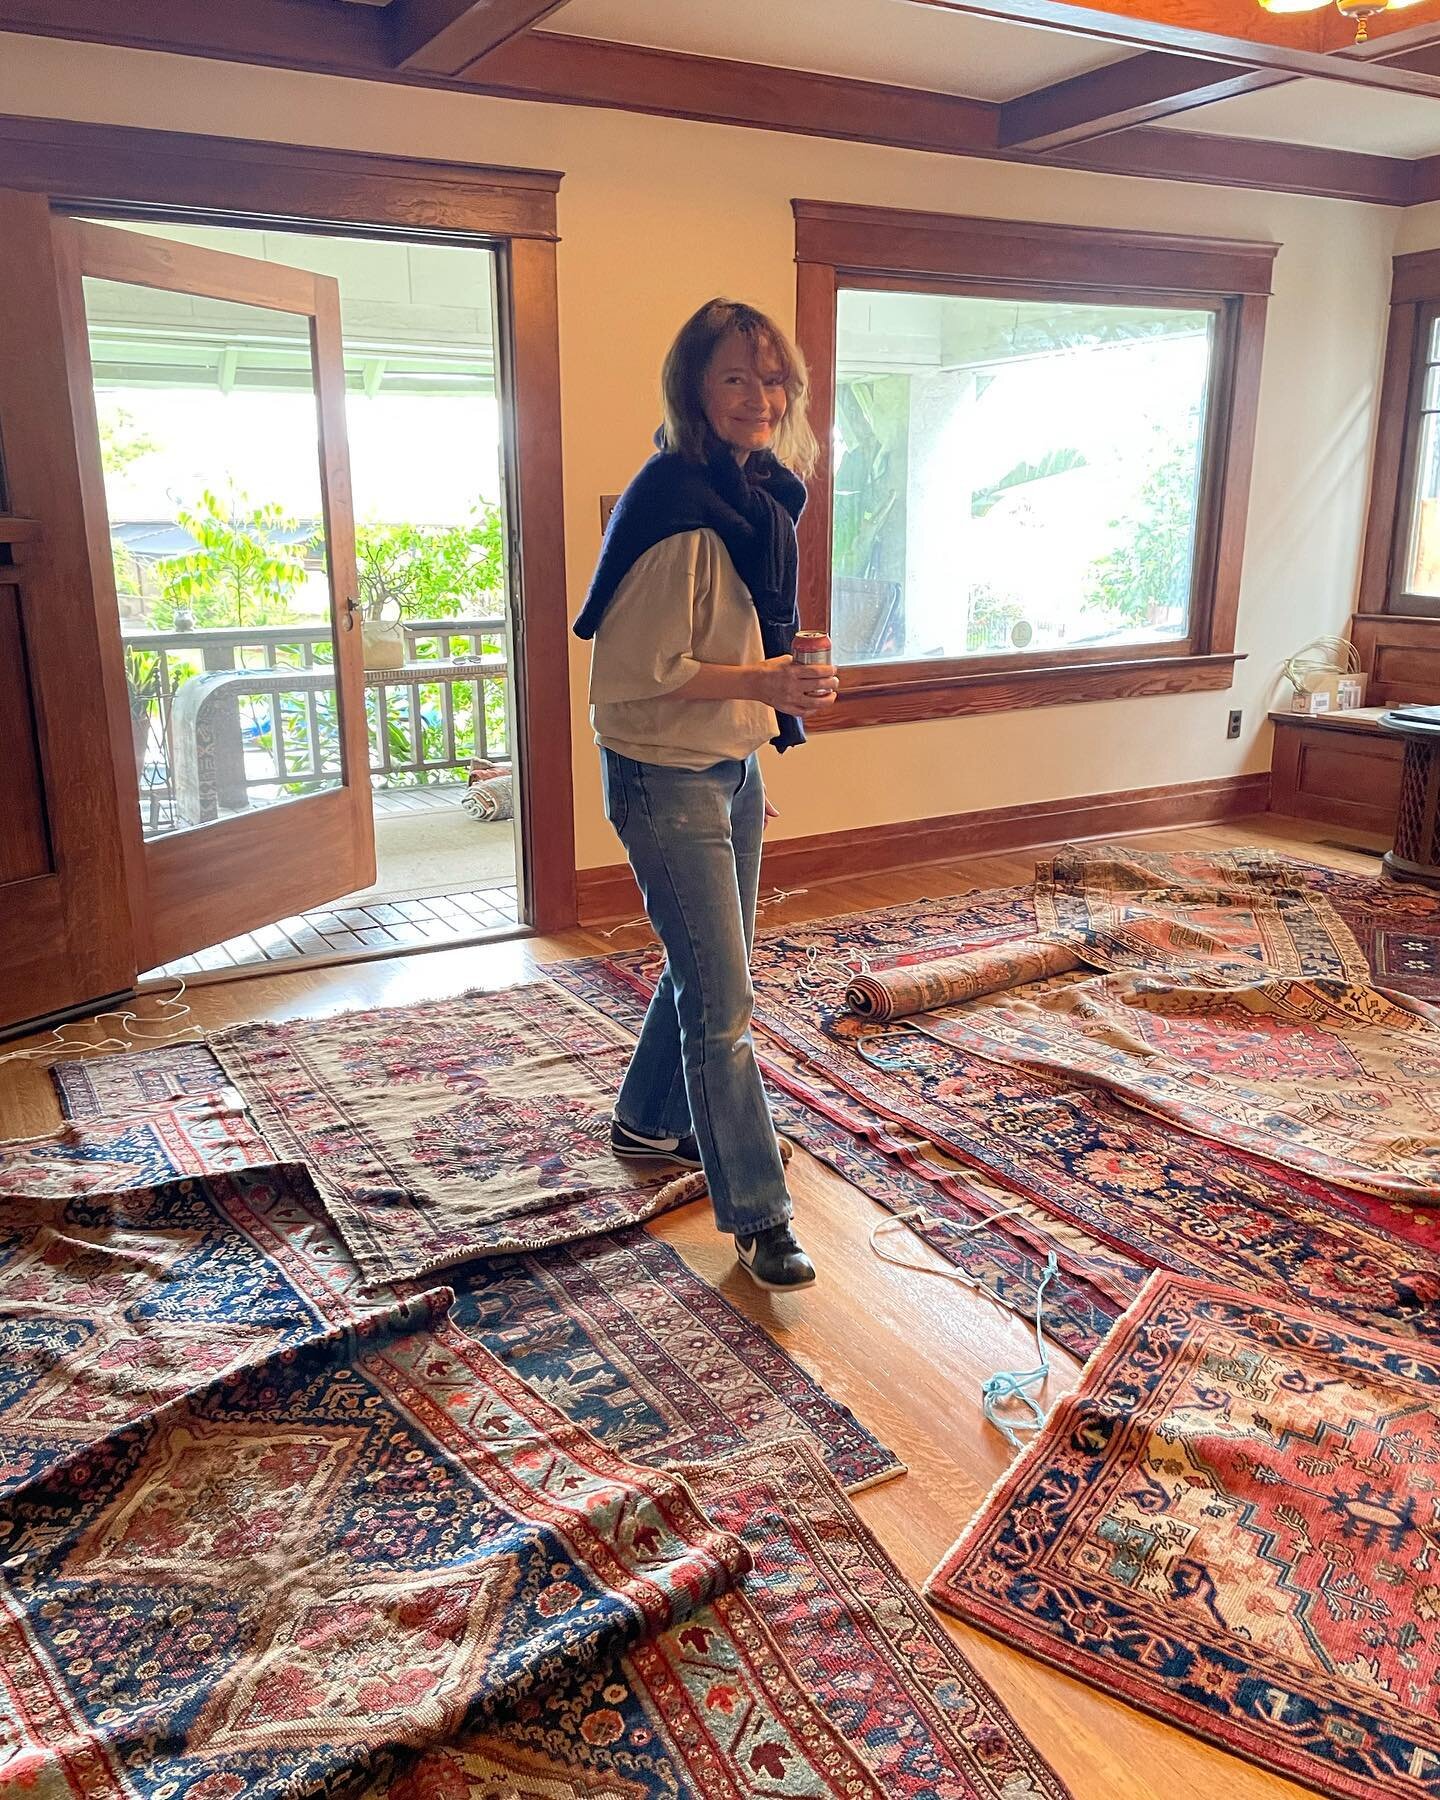 Well that was fun! Just helped place 7 gorgeous rugs in a very proud project of mine. Hope to shoot this beauty one day soon but we still have a lot of furniture to find. But we got the rugs! Also love this photo because it&rsquo;s my happy place.